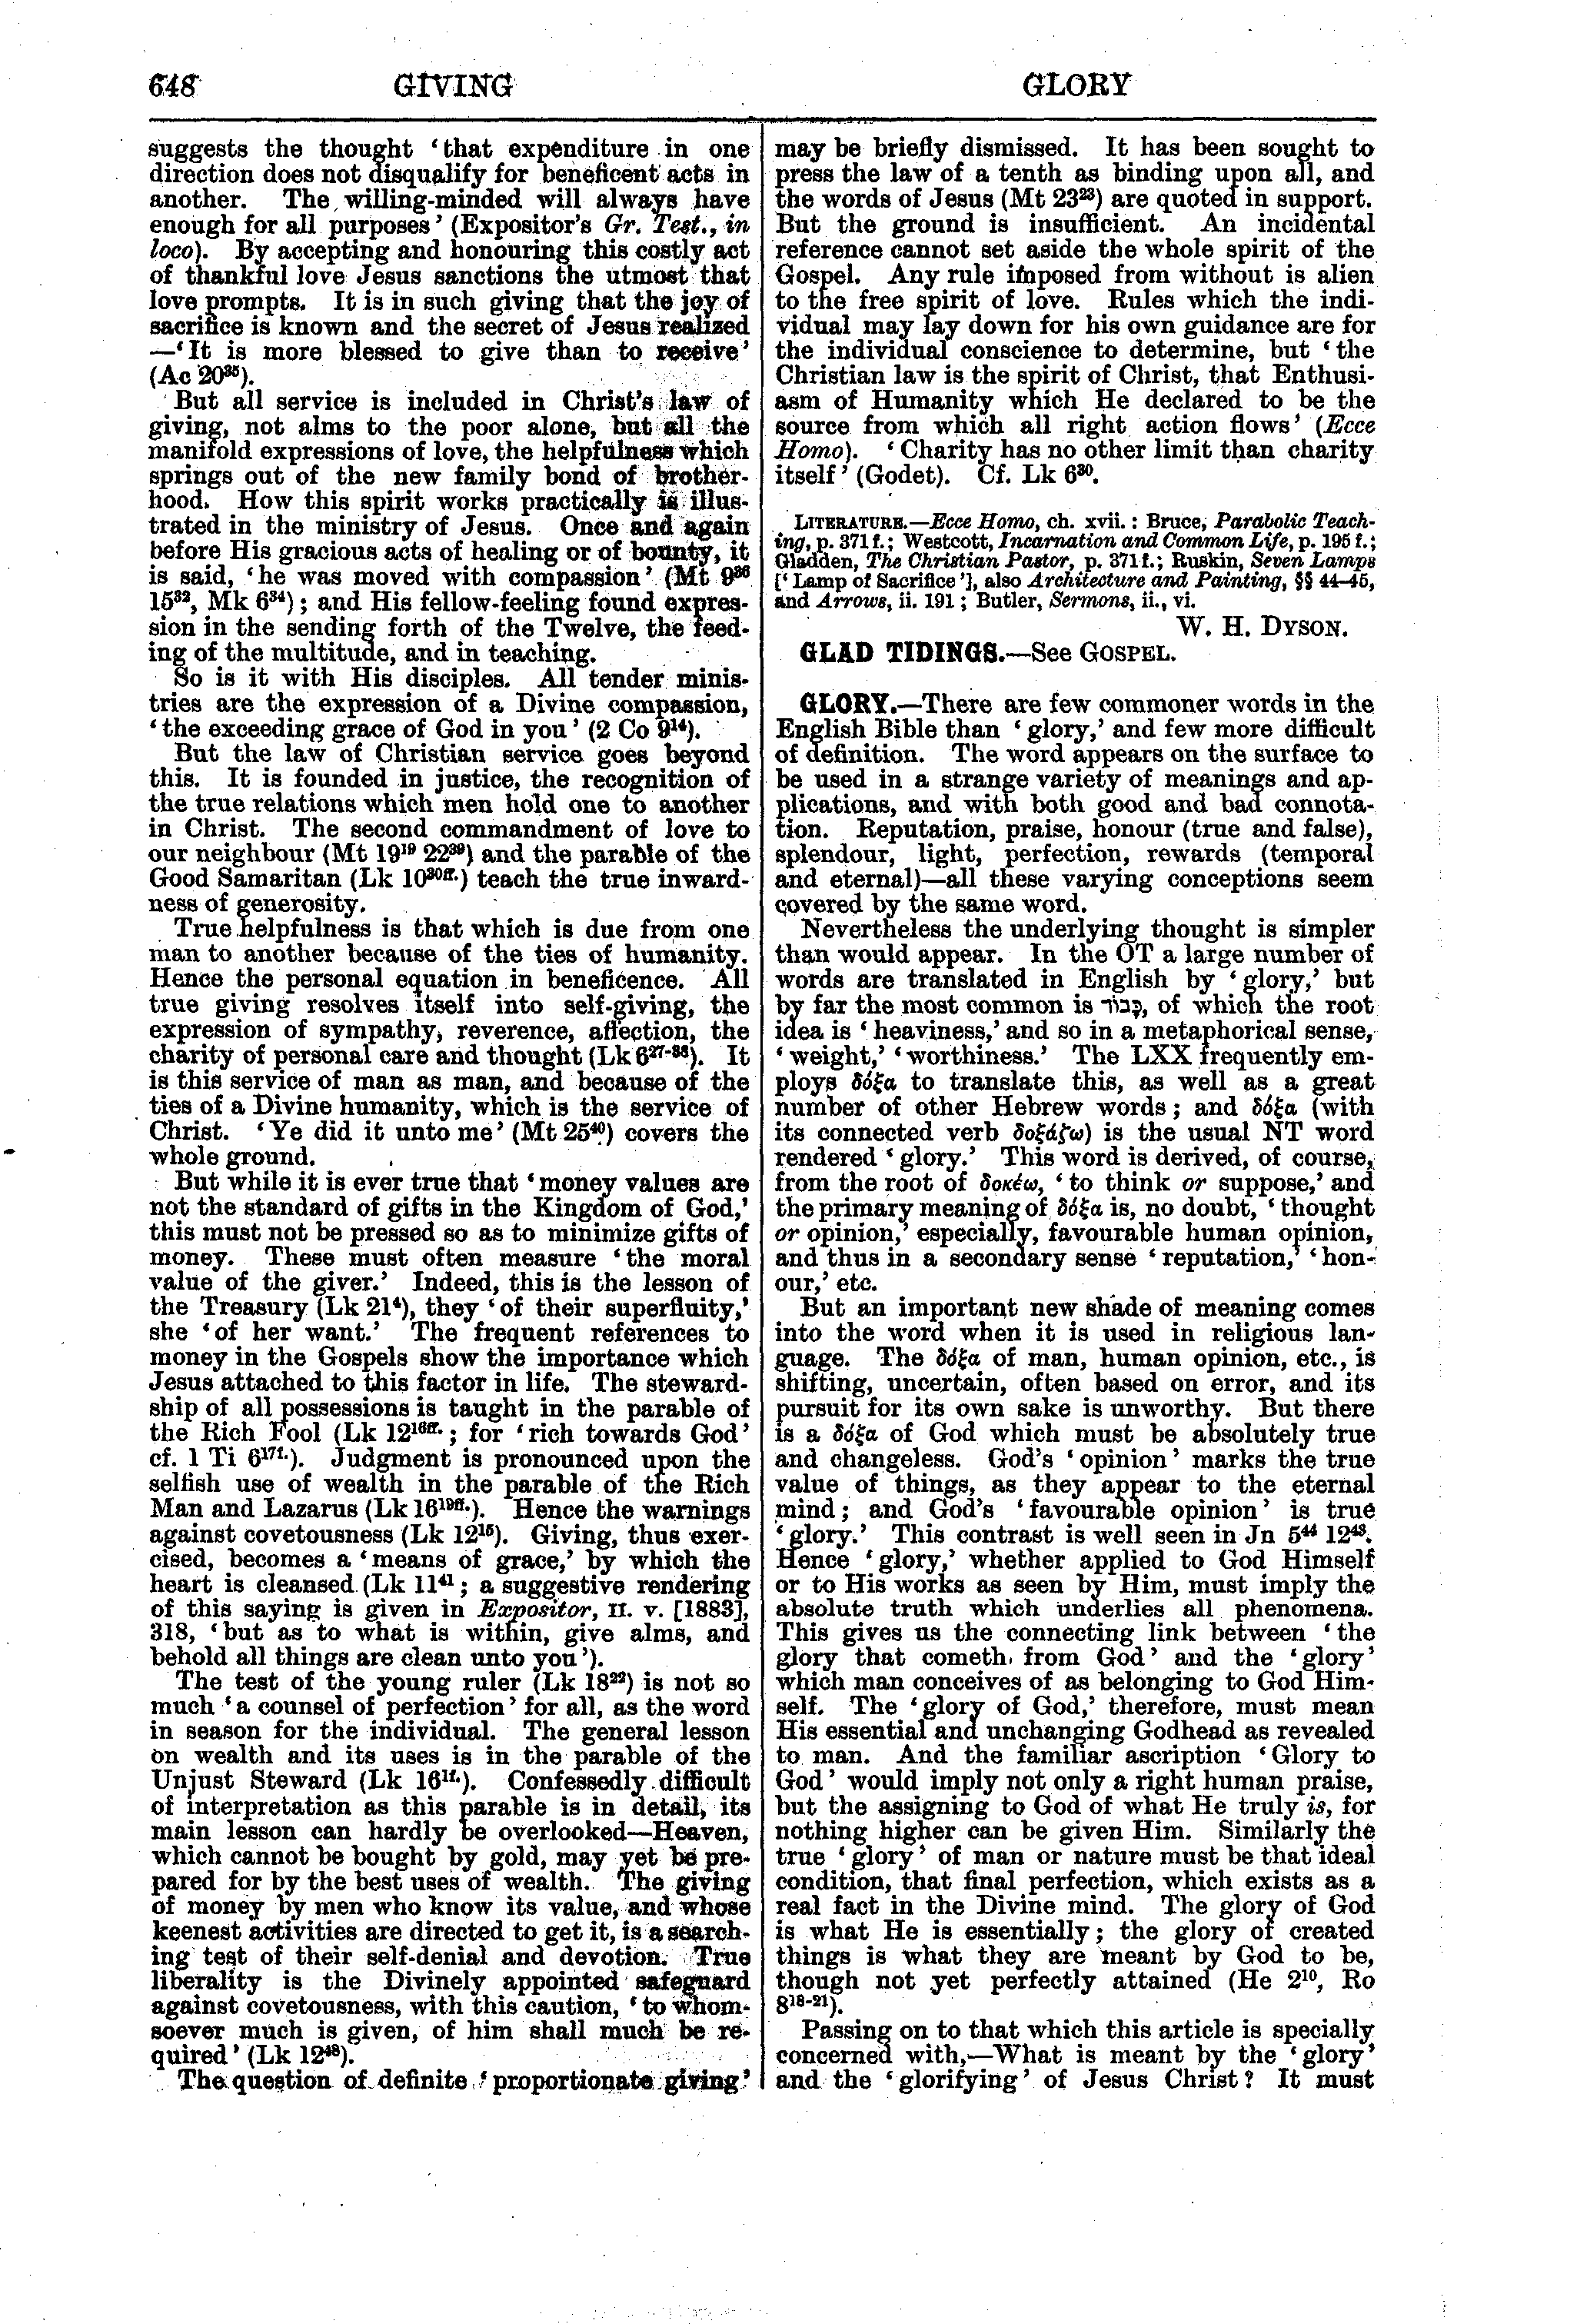 Image of page 648